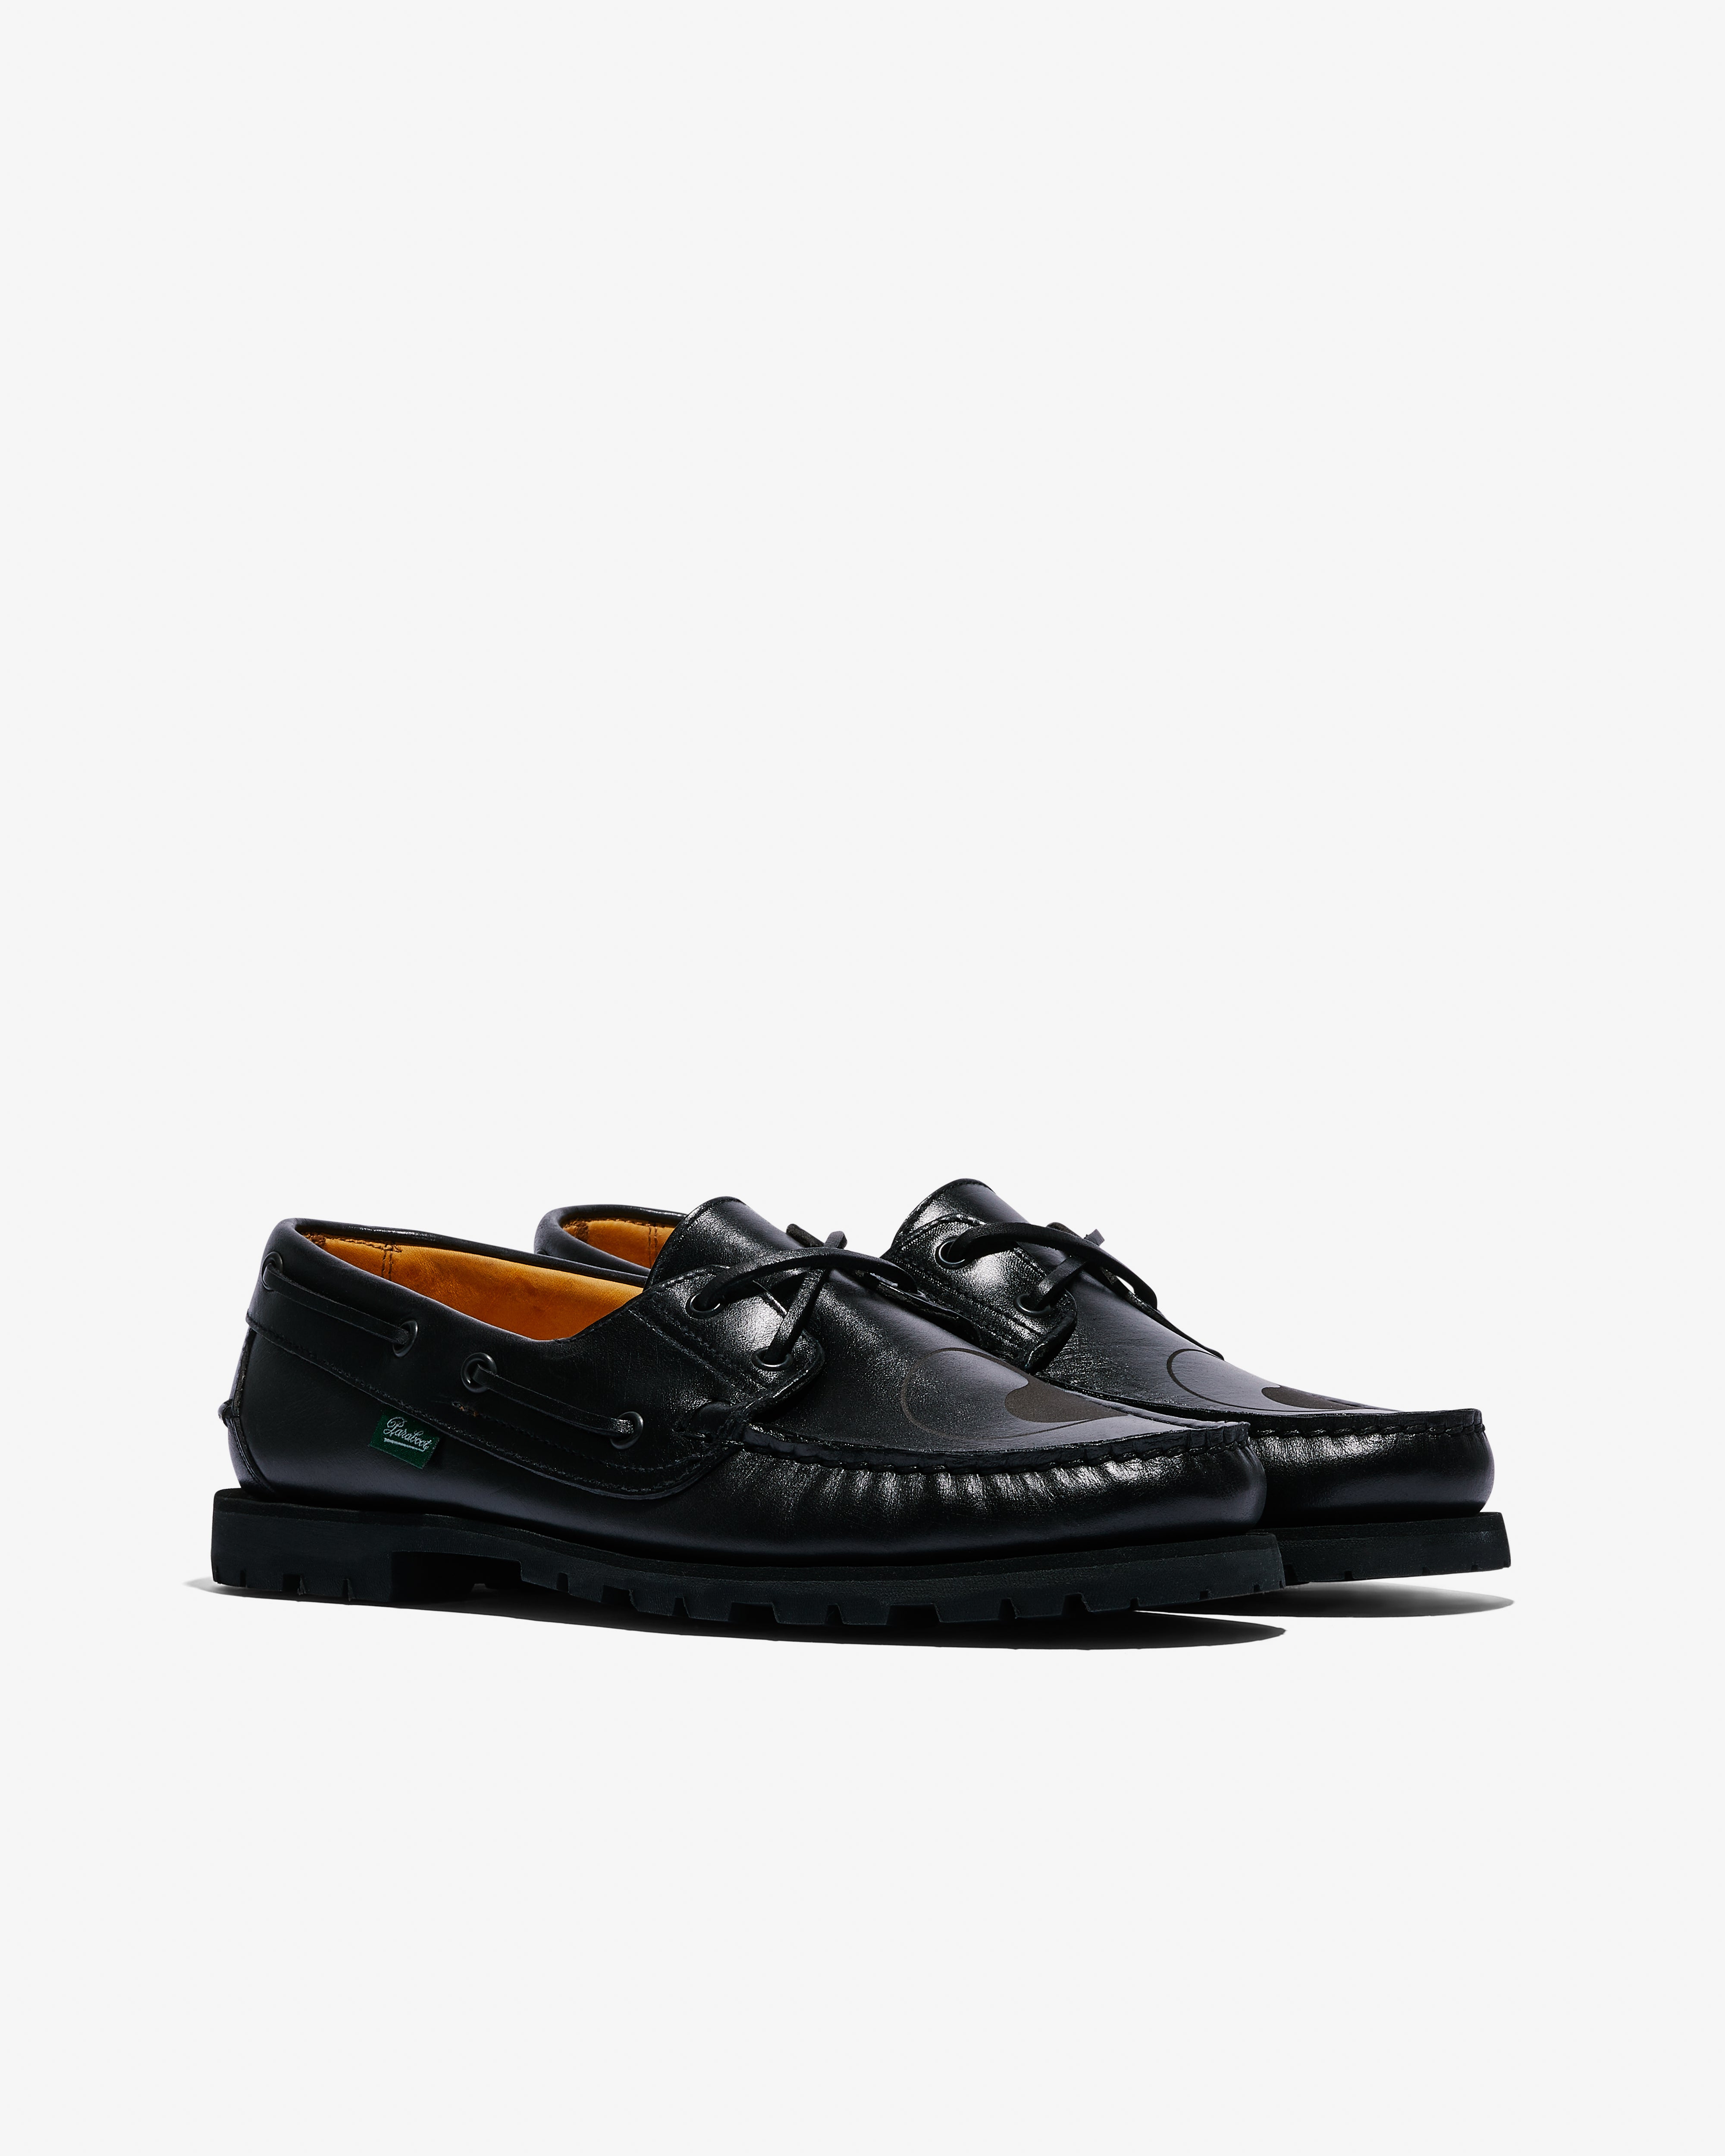 Our Legacy - Paraboot Malo Boat Shoe - (Black)